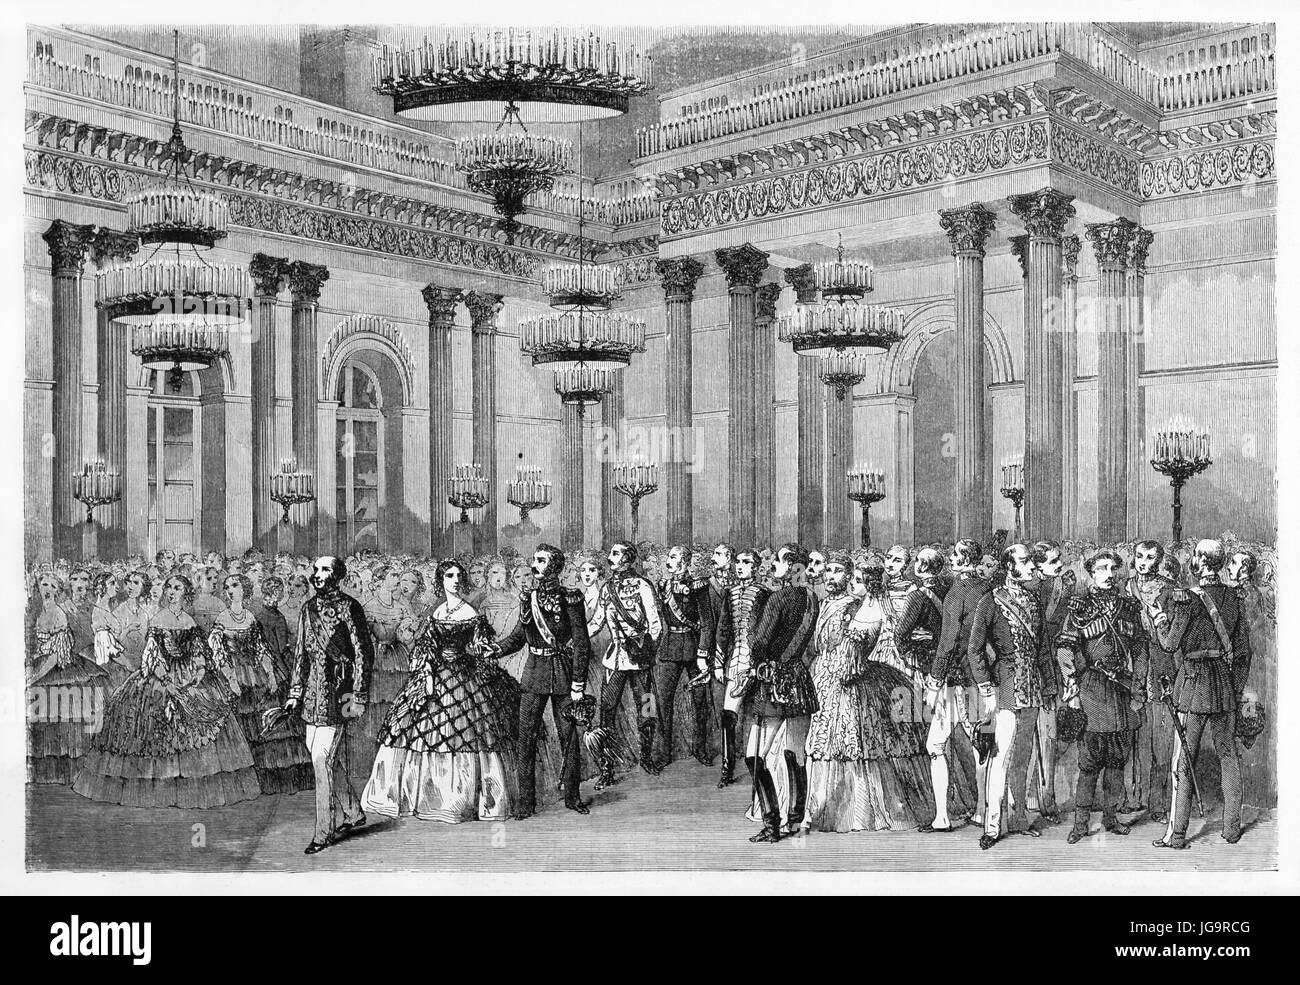 Old illustration of court ball in Saint Petersburg, Russia. Created by Blanchard, published on Le Tour du Monde, Paris, 1861 Stock Photo